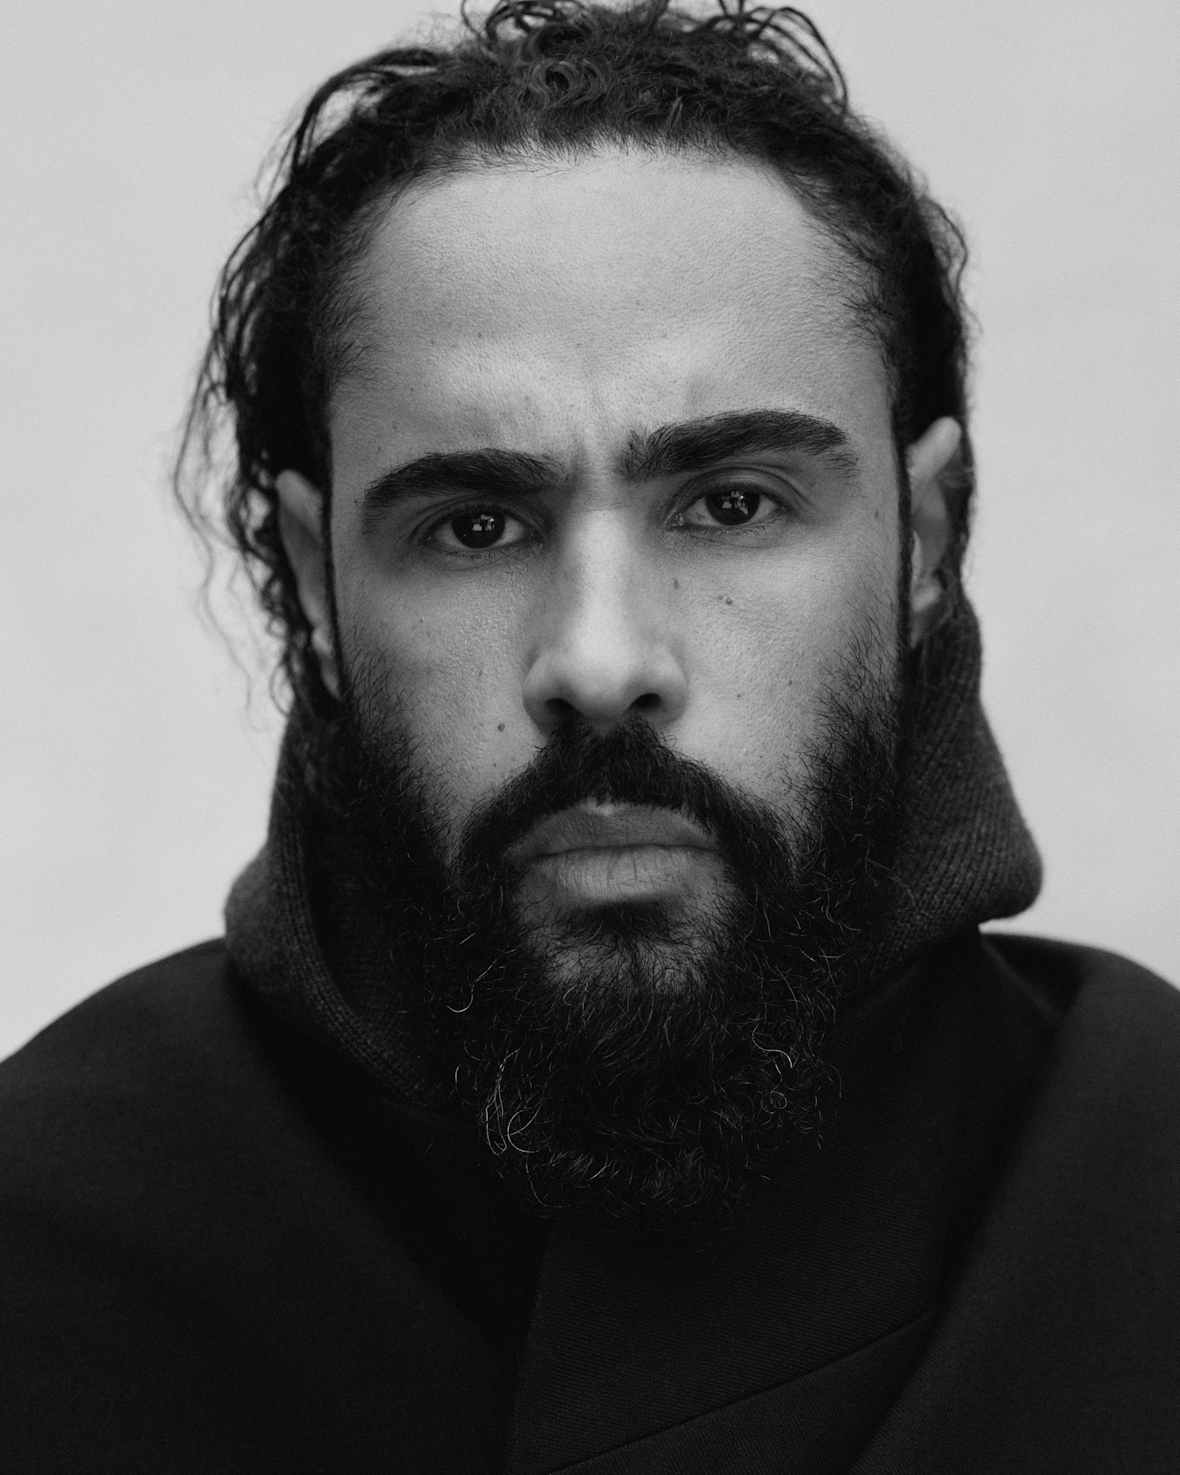 Are These the First Parts of Jerry Lorenzo's Fear of God and adidas?